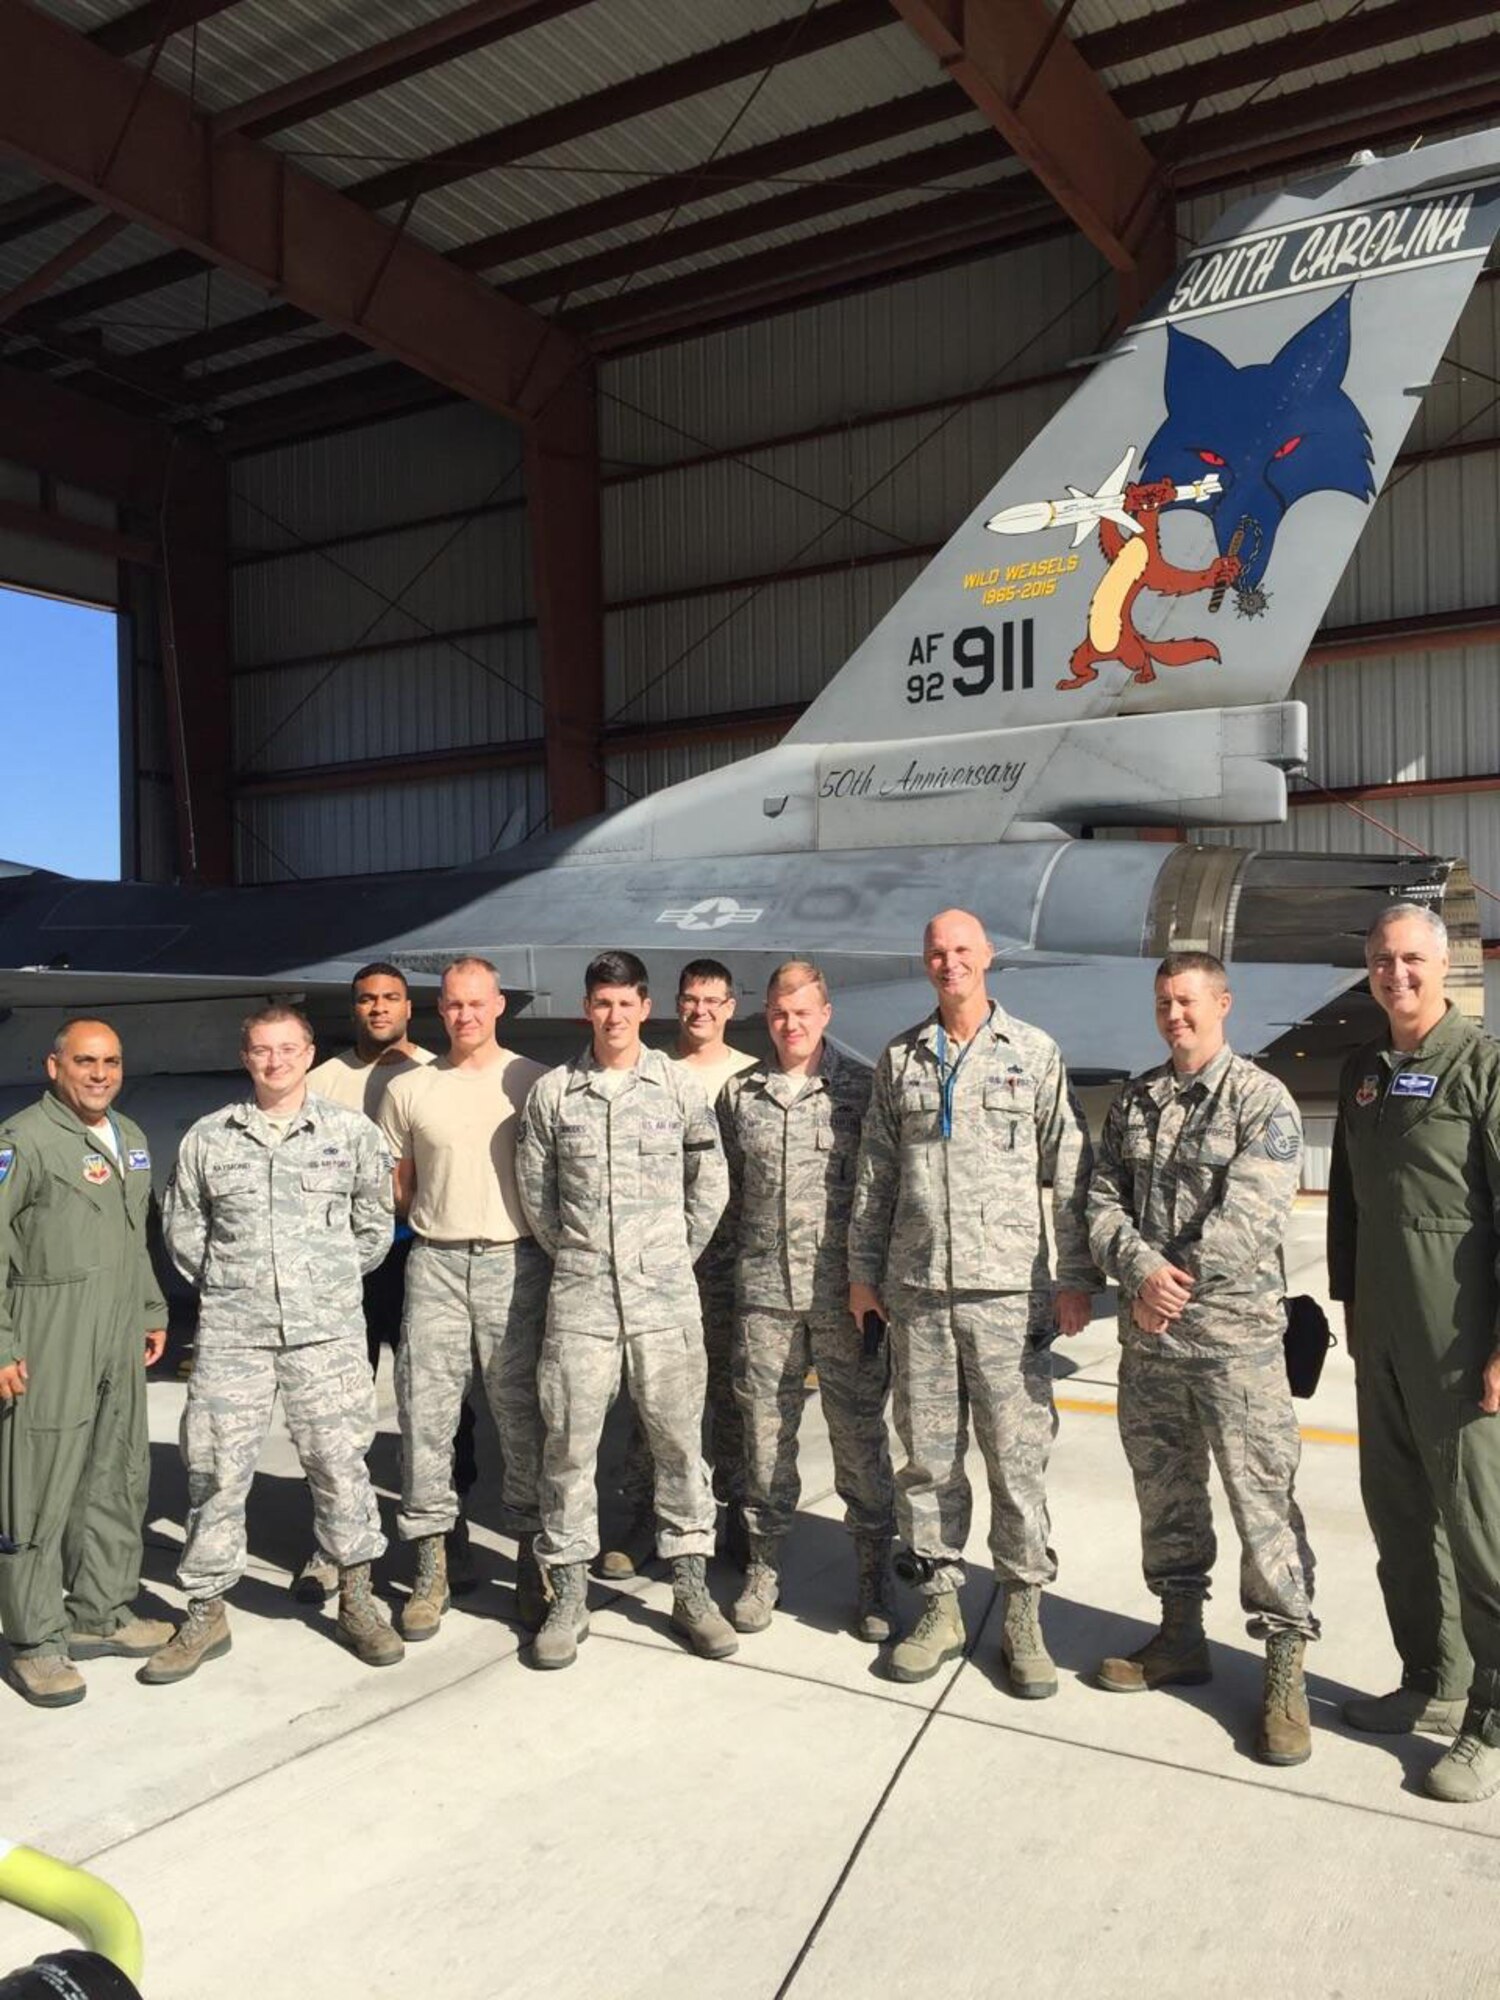 Col. Abu Gahndi, 169th Fighter Wing Commander and Lt. Gen. R. Scott Williams, Continental U.S. NORAD Region – 1st Air Force (Air Forces Northern) Commander, flank an F-16 Viper maintenance crew during Williams’ visit to the unit Dec. 5.  Williams regularly visits Air National Guard units throughout the country to stay current about operational issues and unit concerns. (Air Force photo by Capt. Emily Meredith)